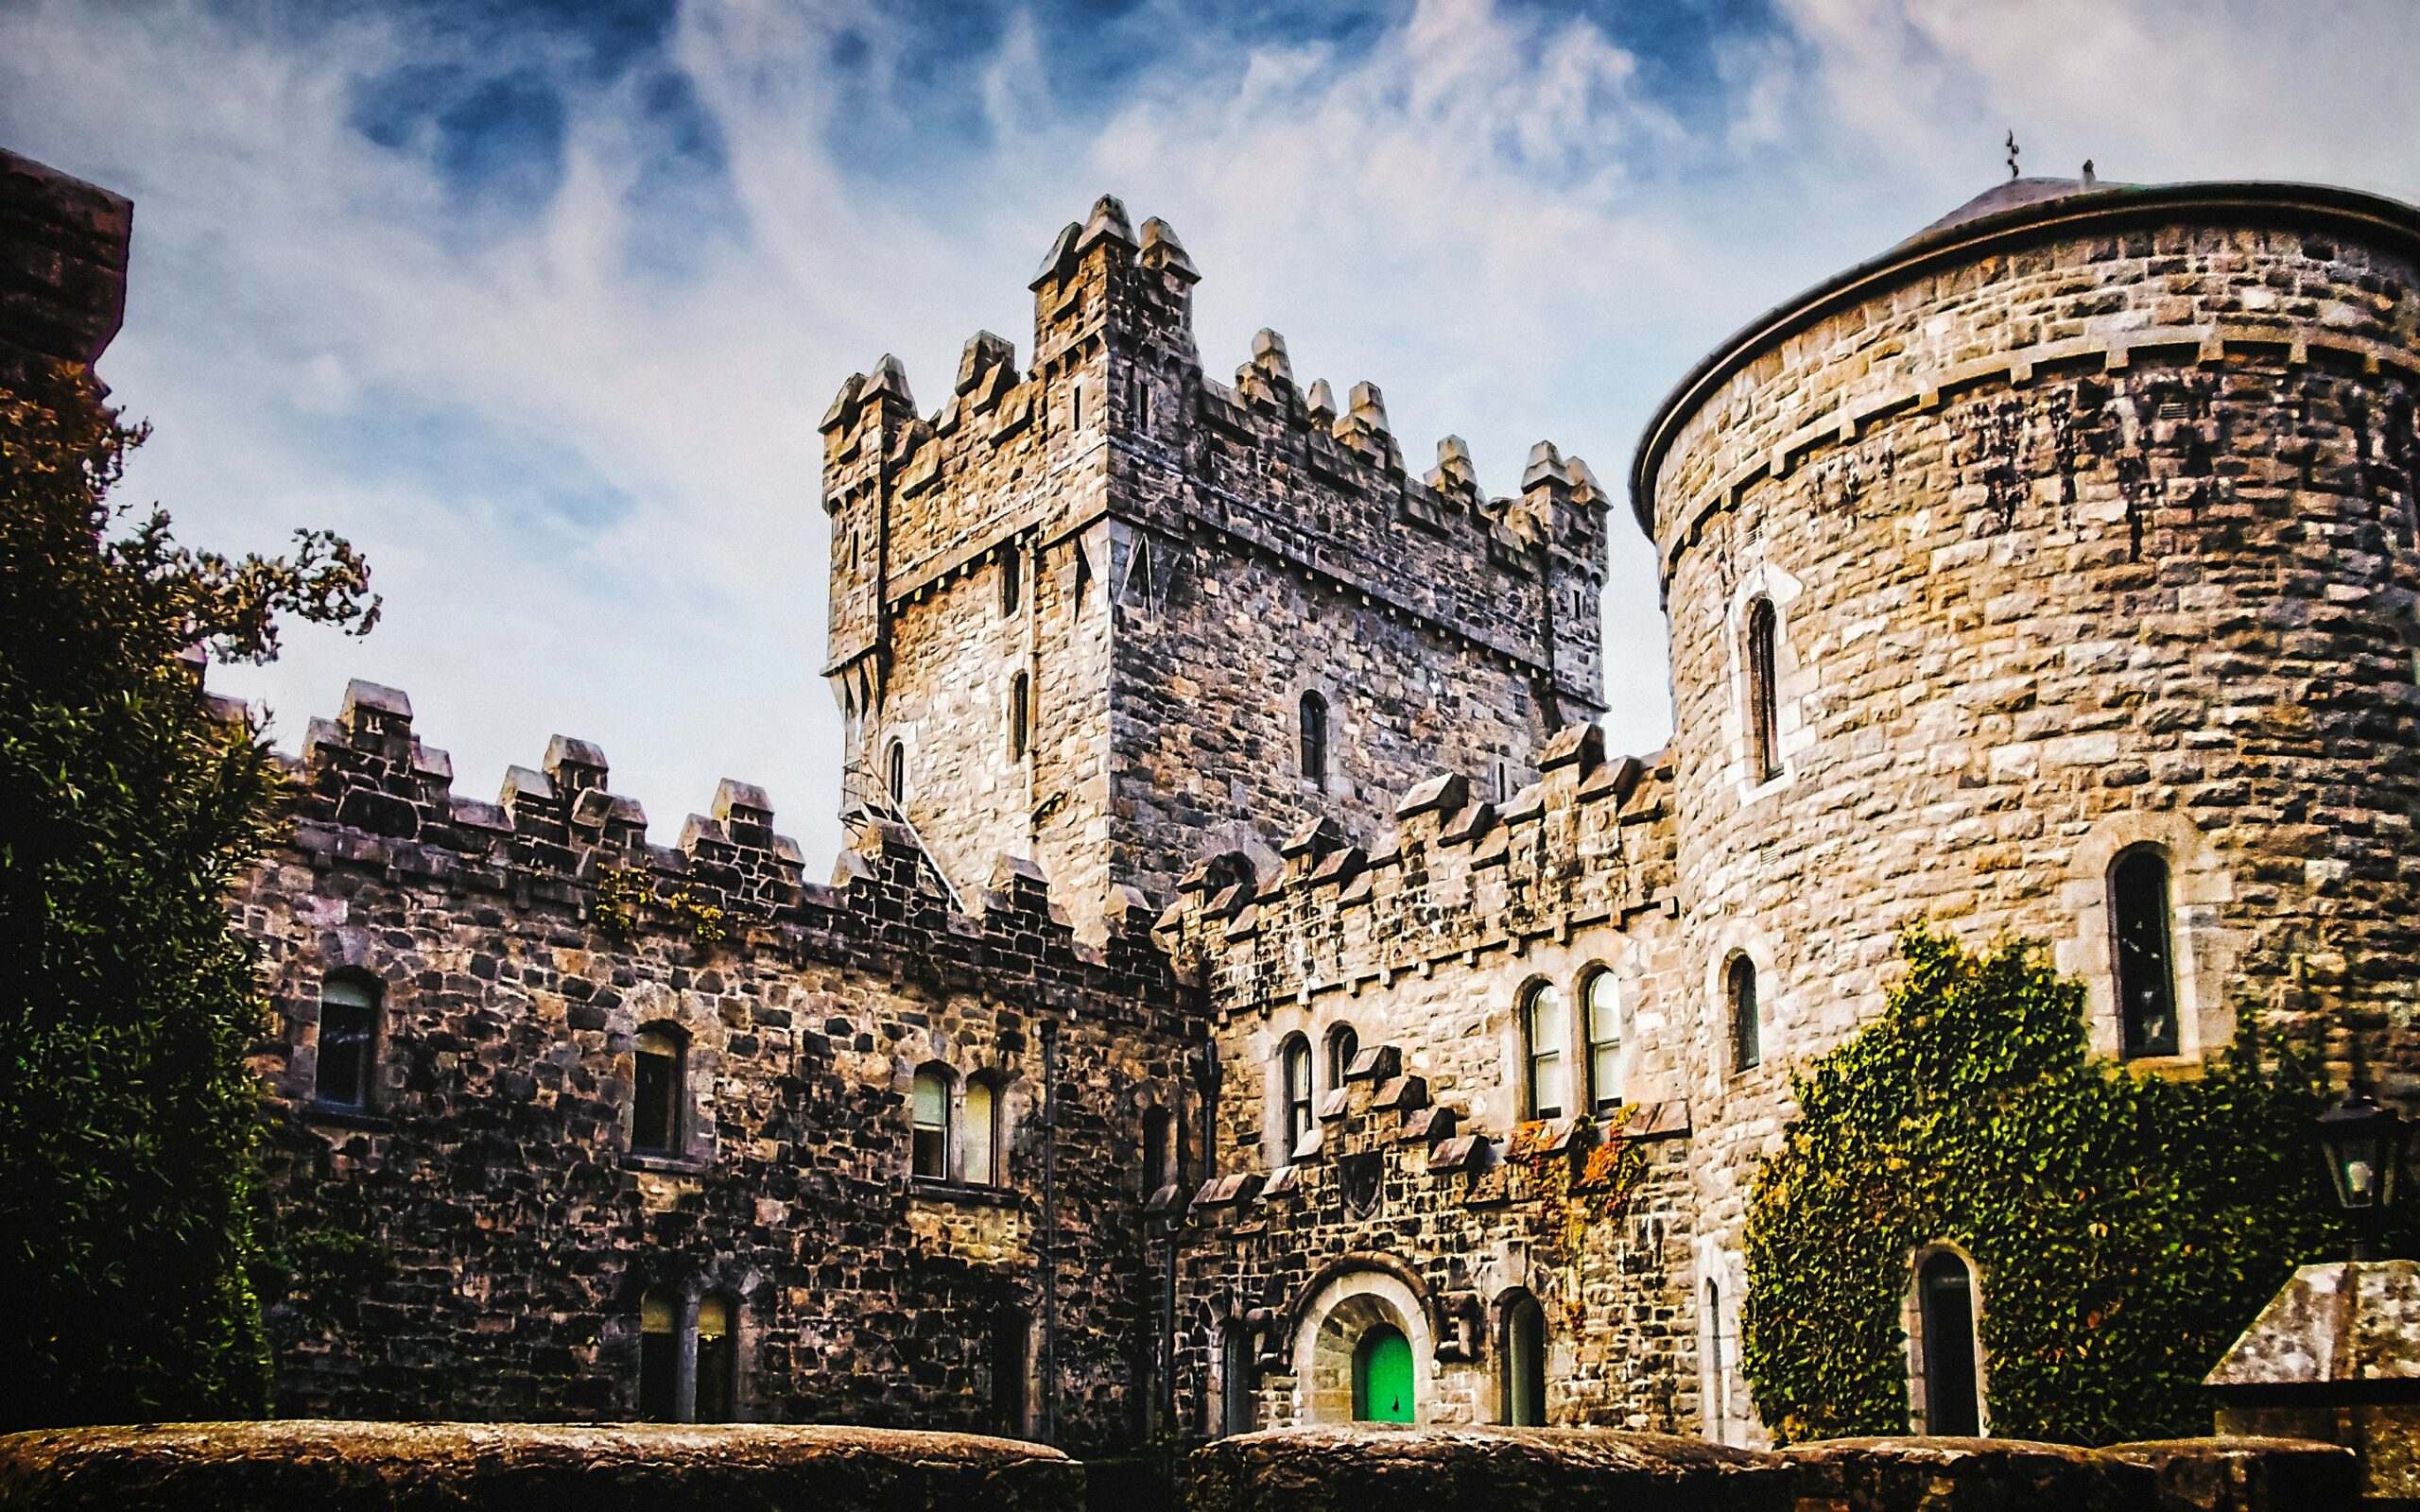 How many Castles are in Ireland?